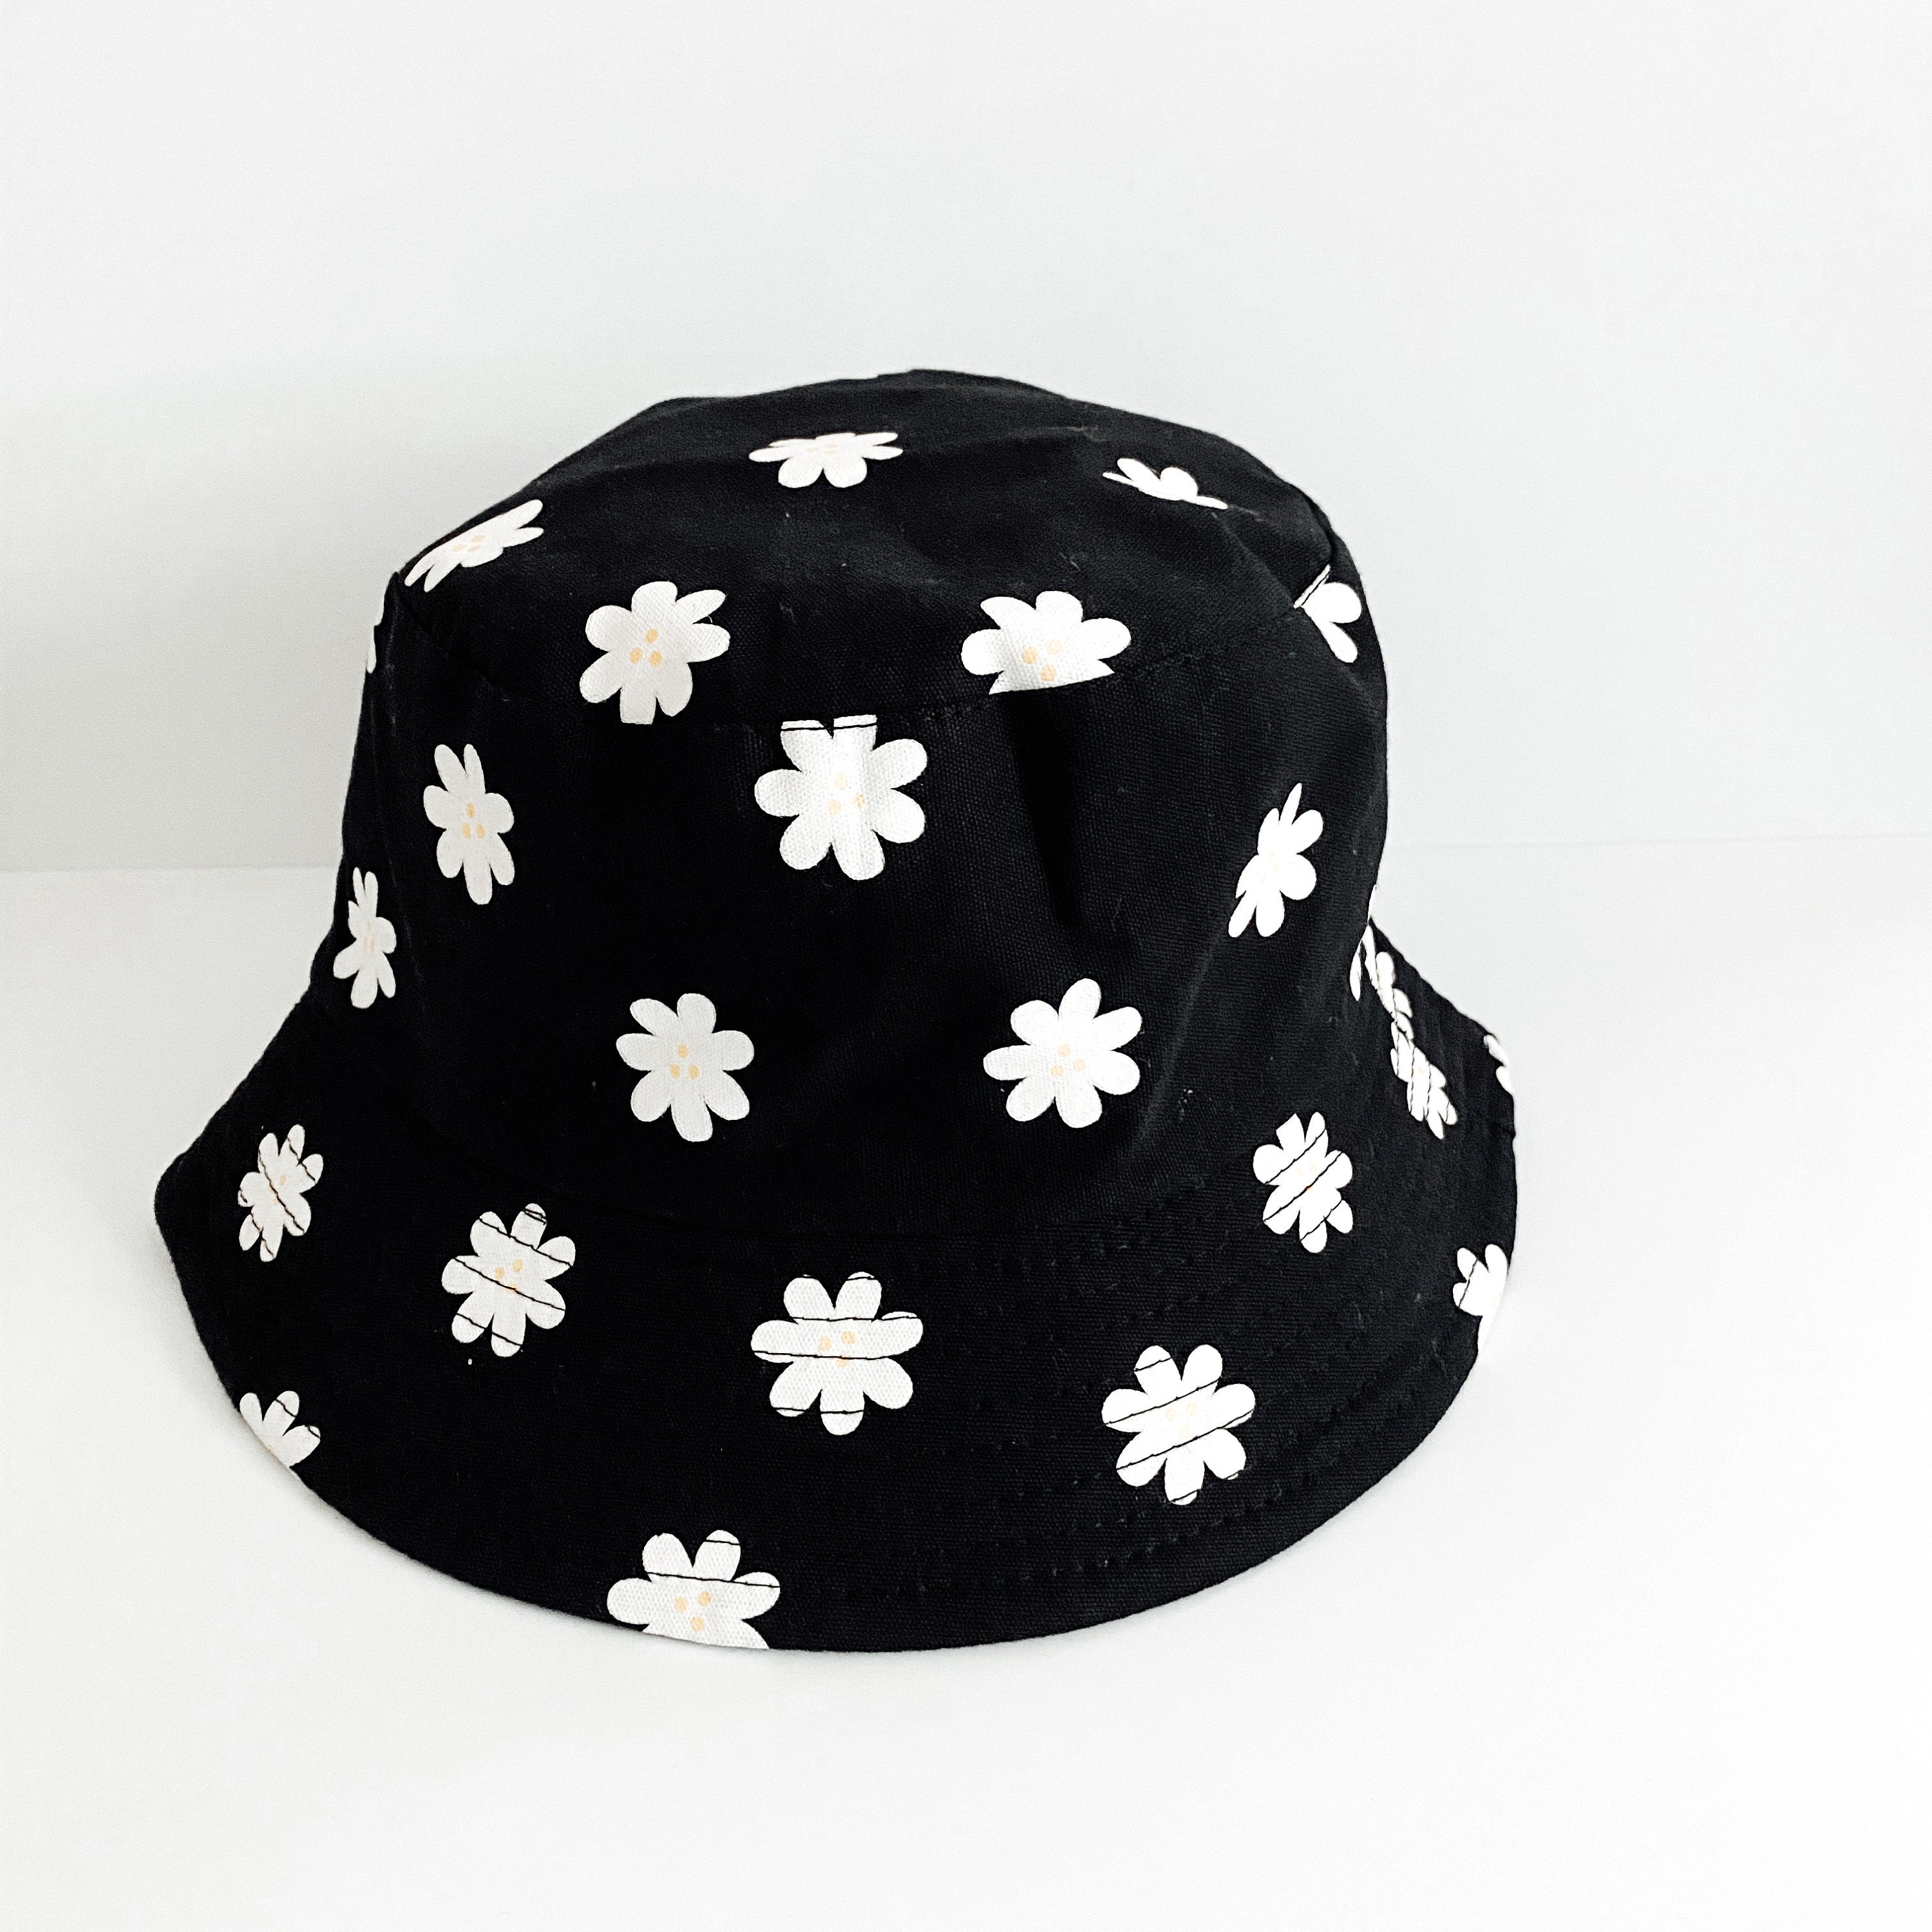 REVERSIBLE Black Large Patterned Daisy & Solid Bucket Hat | Etsy